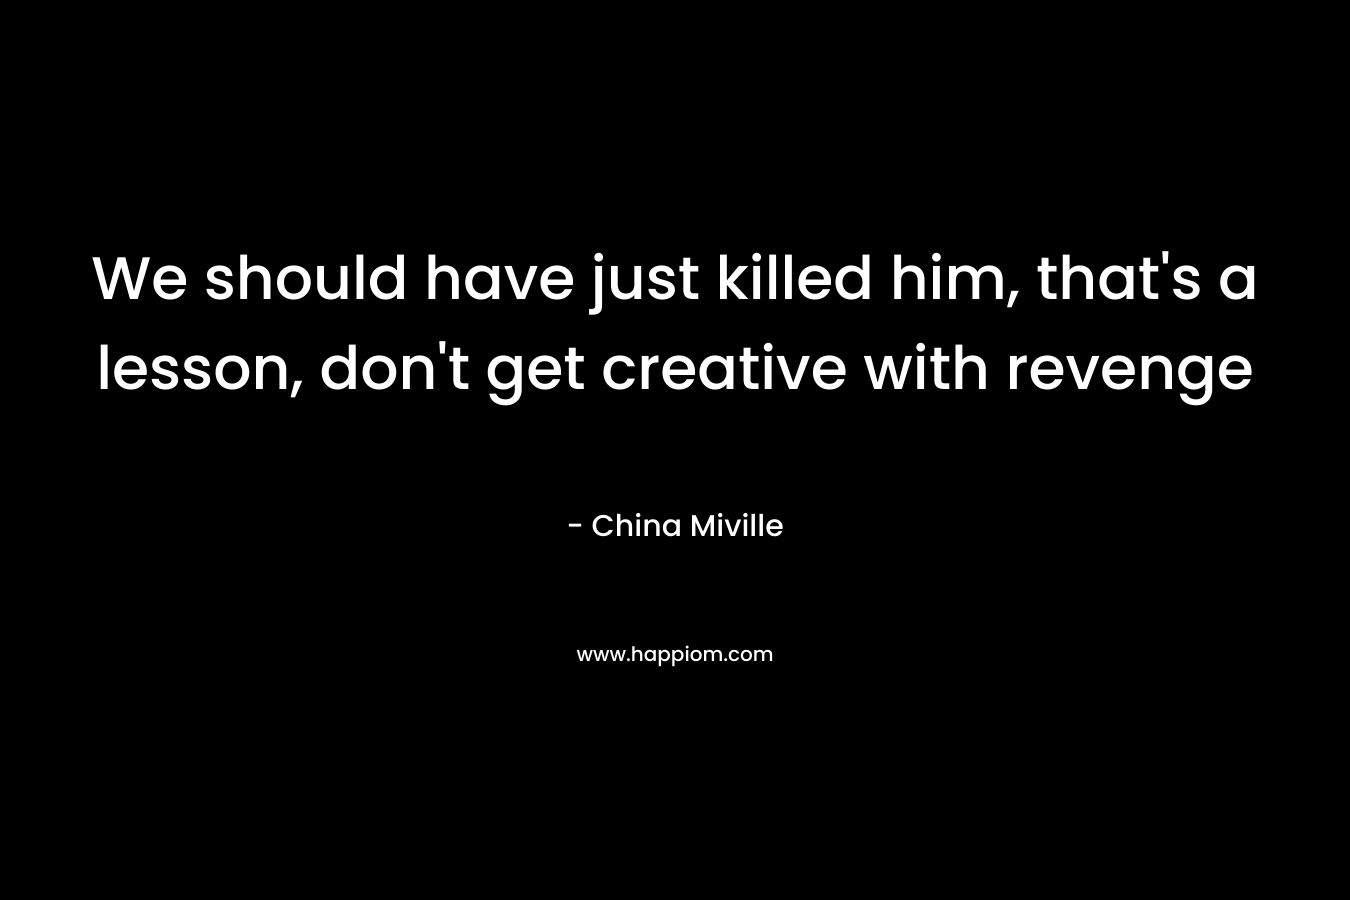 We should have just killed him, that’s a lesson, don’t get creative with revenge – China Miville